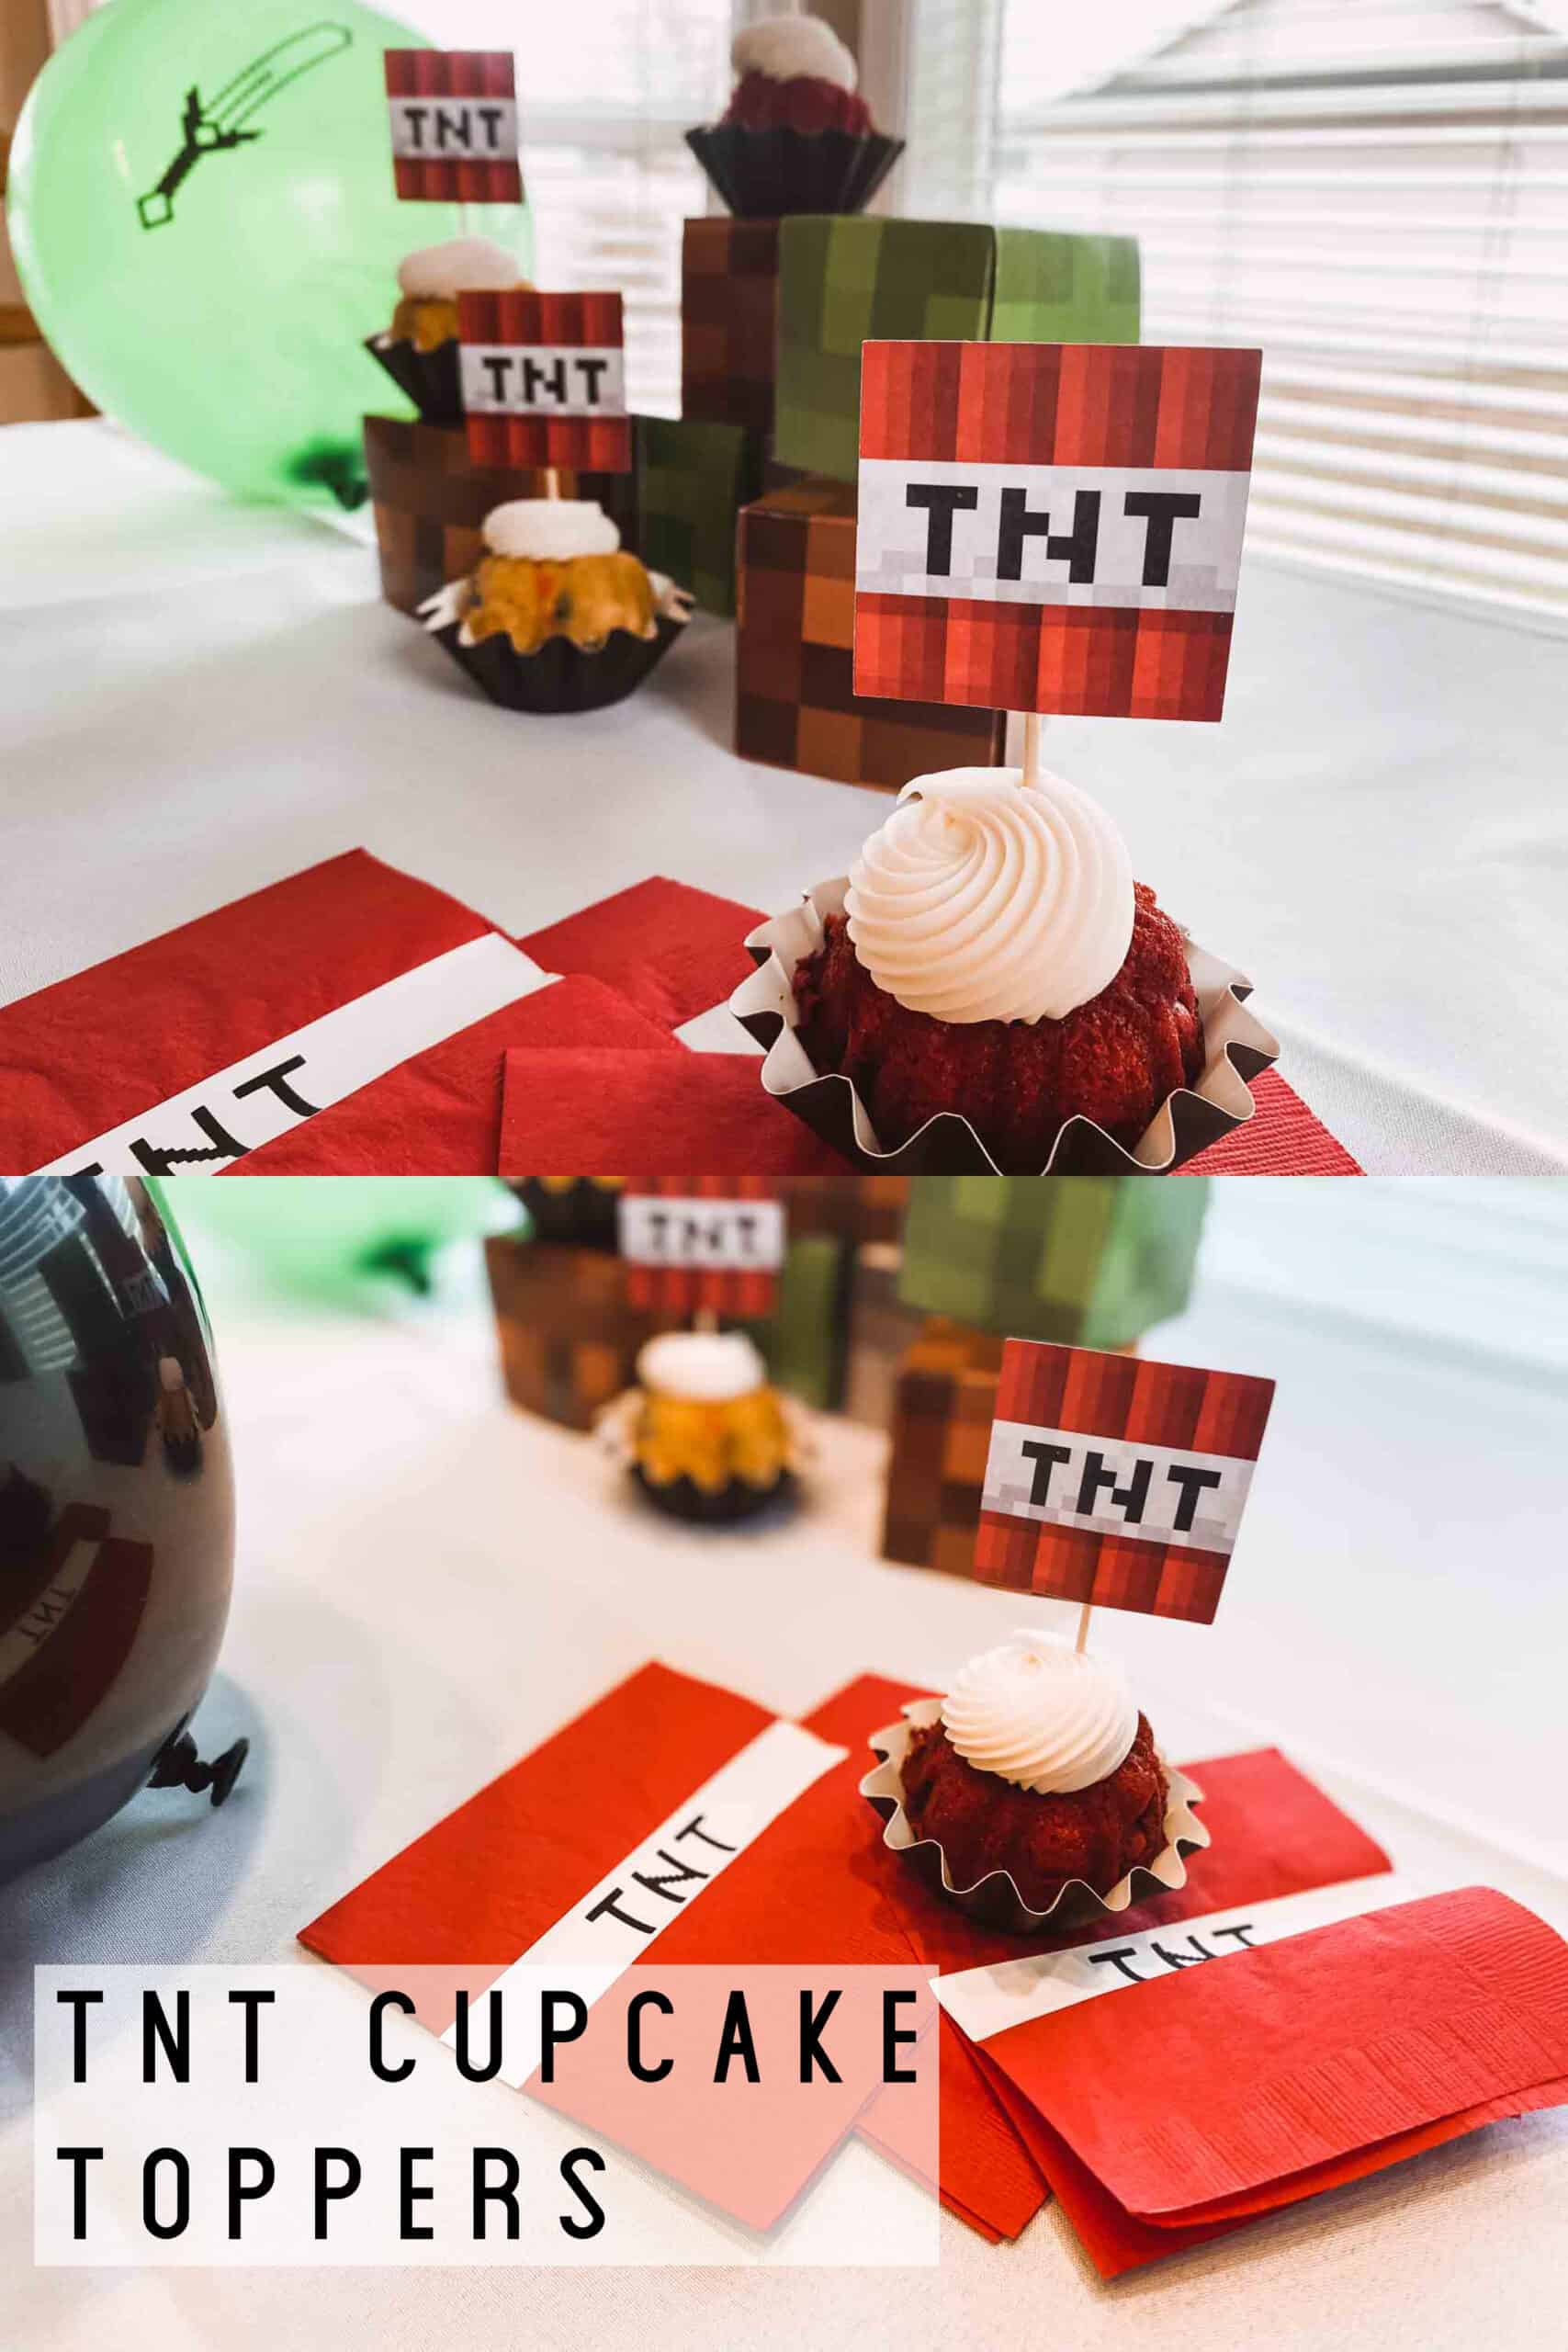 Top a cupcake with this fun minecraft party supply DIY.